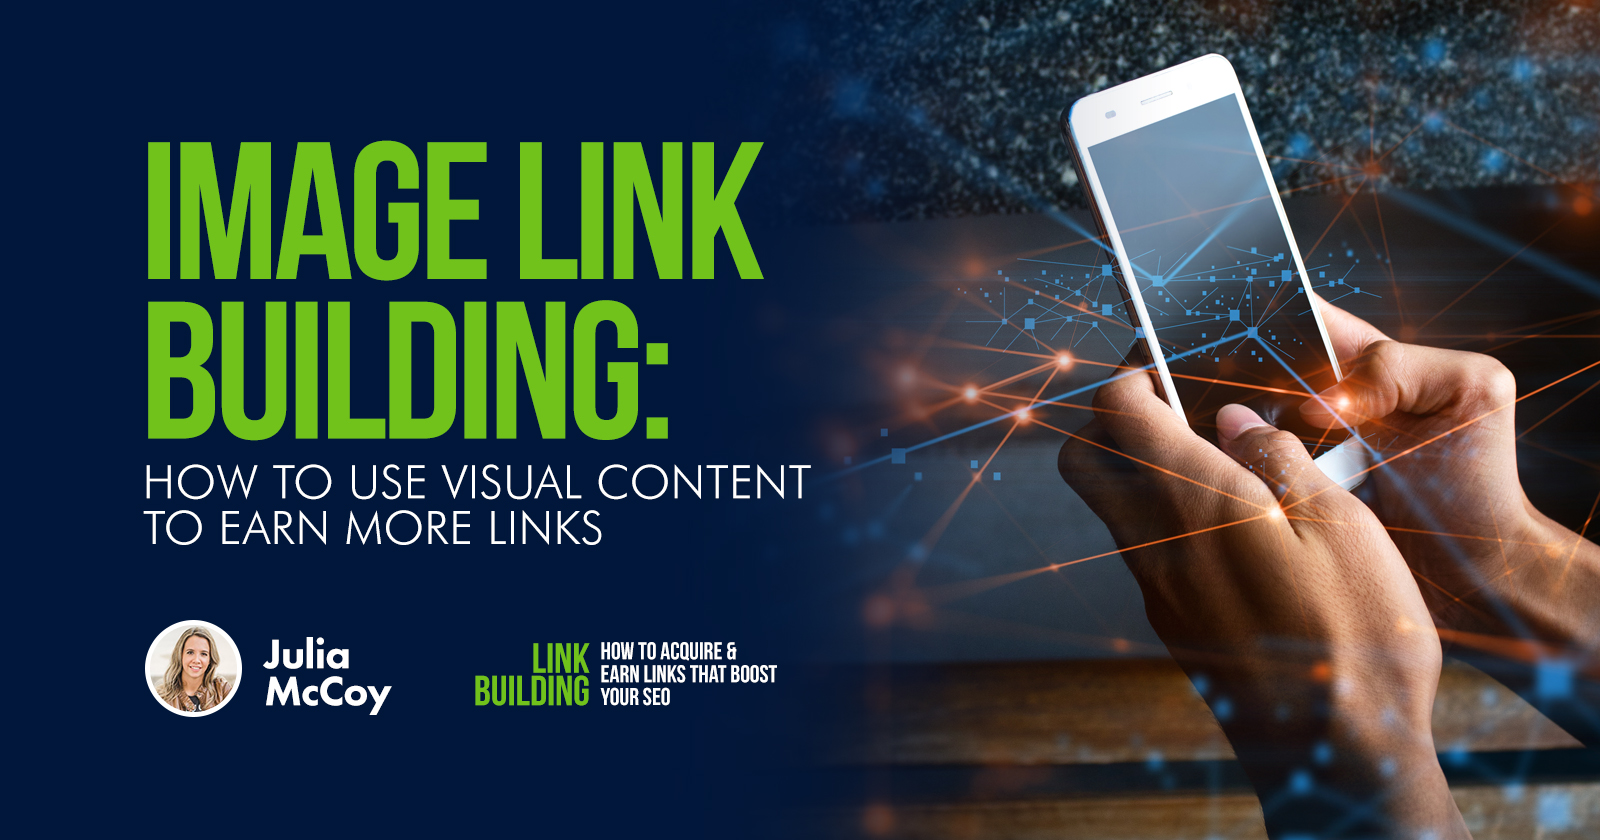 LB Guide - Image Link Building - How to Use Visual Content to Earn More Links - Julia McCoy